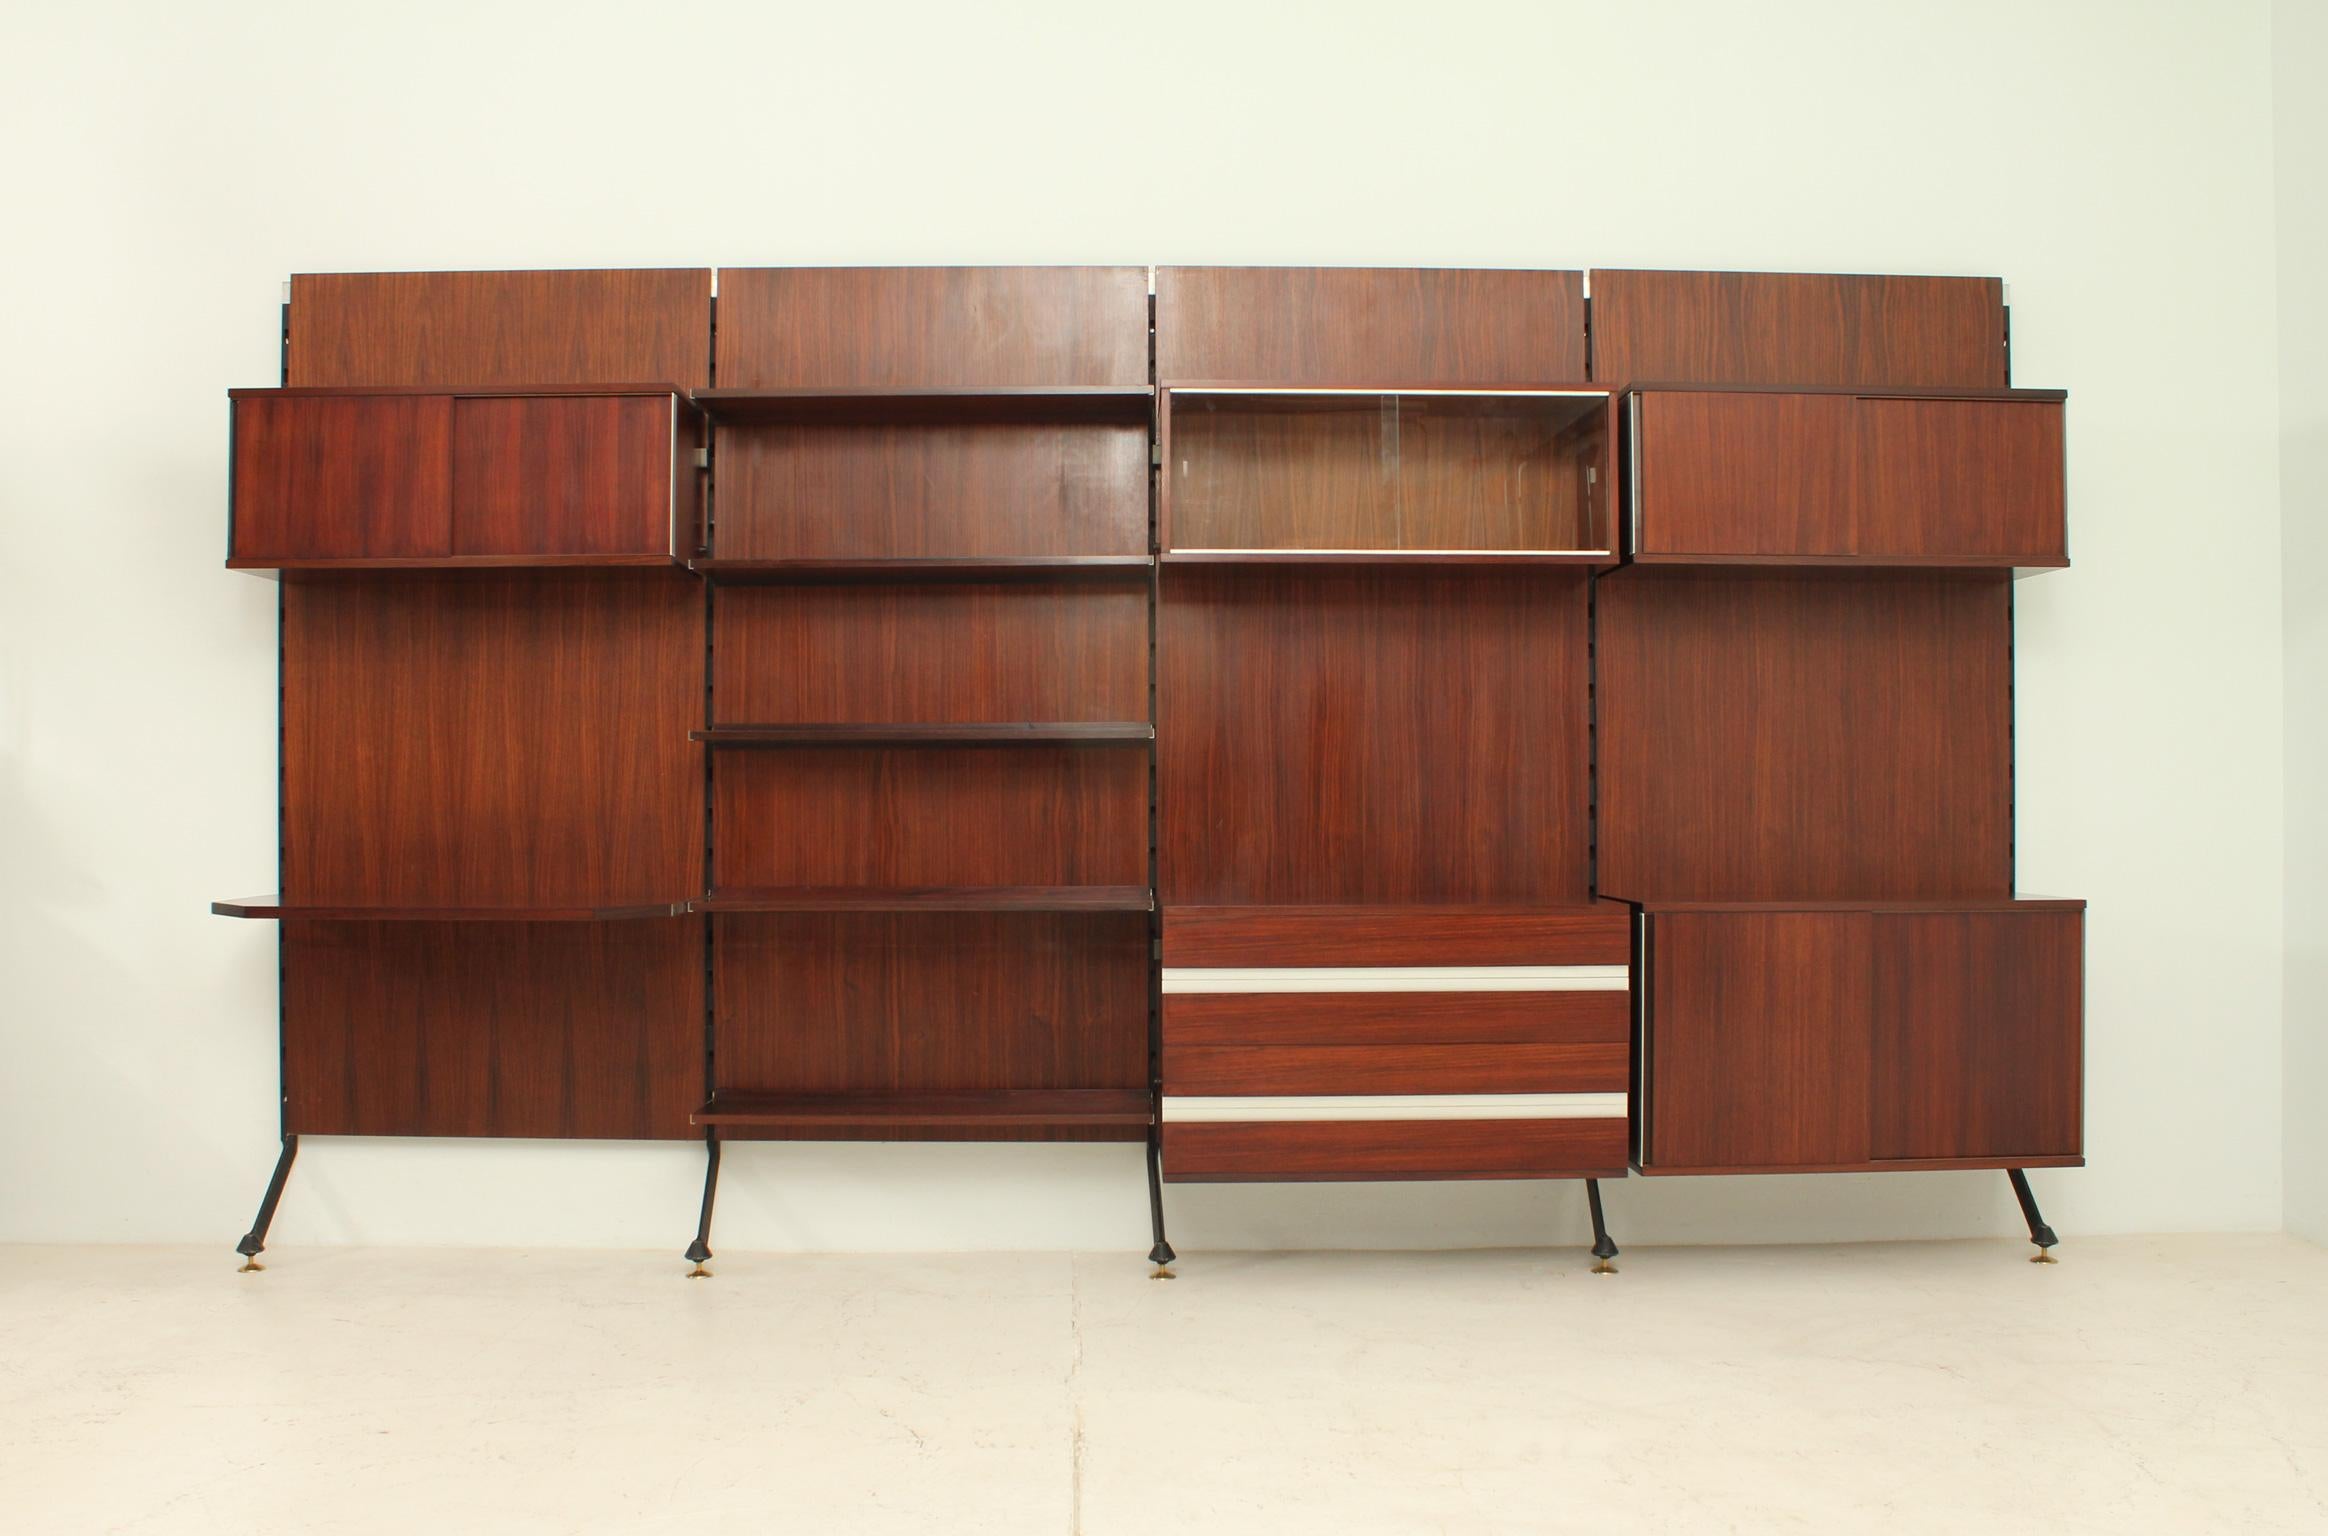 Urio wall system in hardwood designed in 1957 by Ico Parisi for MIM Roma, Italy. Different elements including shelves, desk, chest of drawers and cupboards with sliding doors.